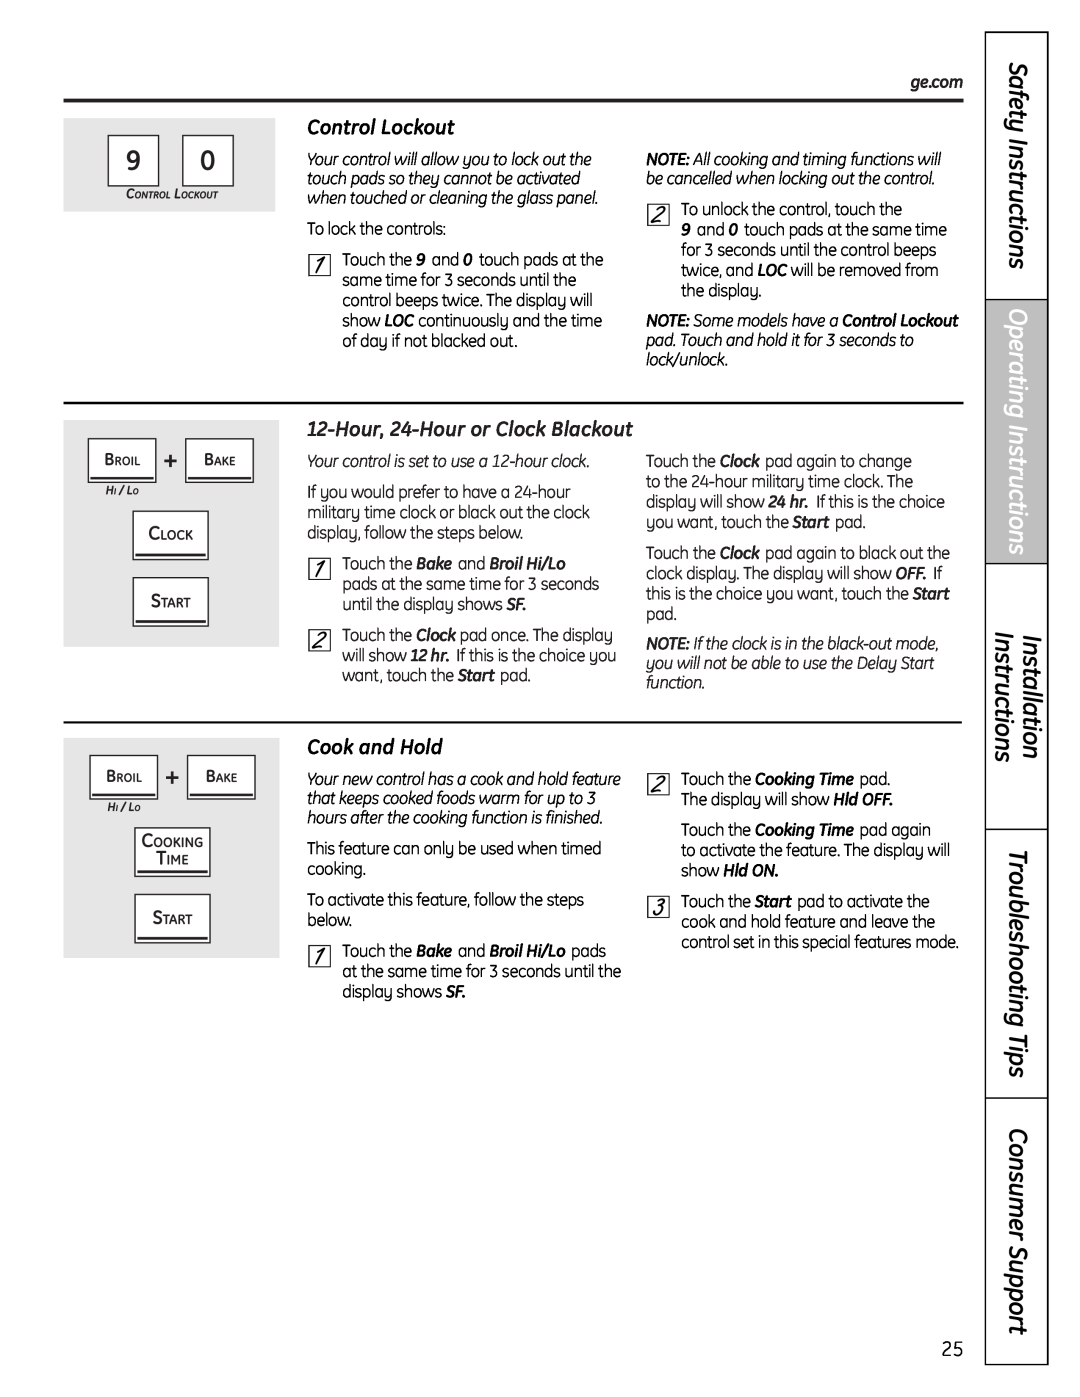 GE P2B918 Instructions Operating, Control Lockout, Cook and Hold, Hour, 24-Hour or Clock Blackout, Safety, ge.com 